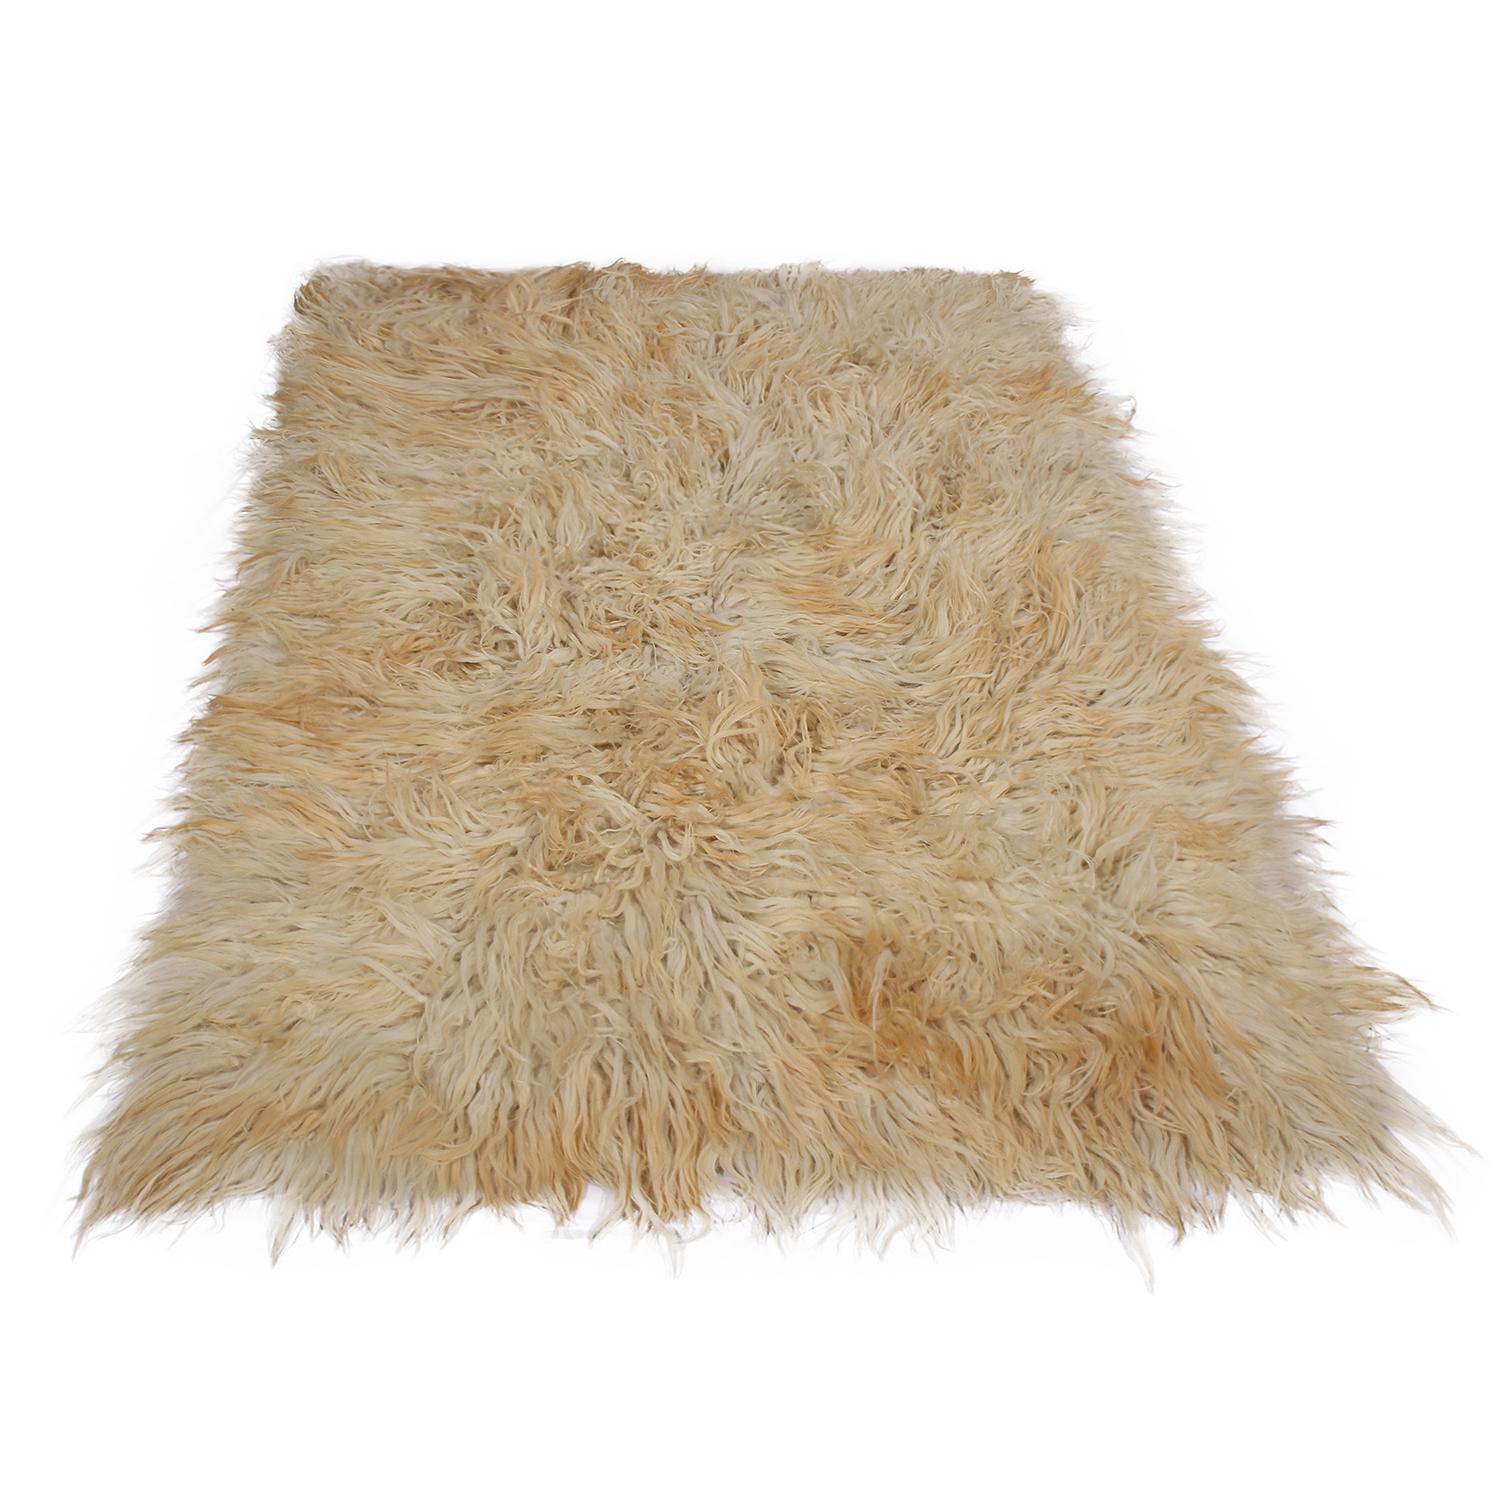 Hand knotted in Turkey originating between 1950-1960, this vintage midcentury Tulu rug offers a distinguished shag pile height with an inviting, plush texture, complemented by the warm, radiant cream and beige-brown colorway as well as the versatile